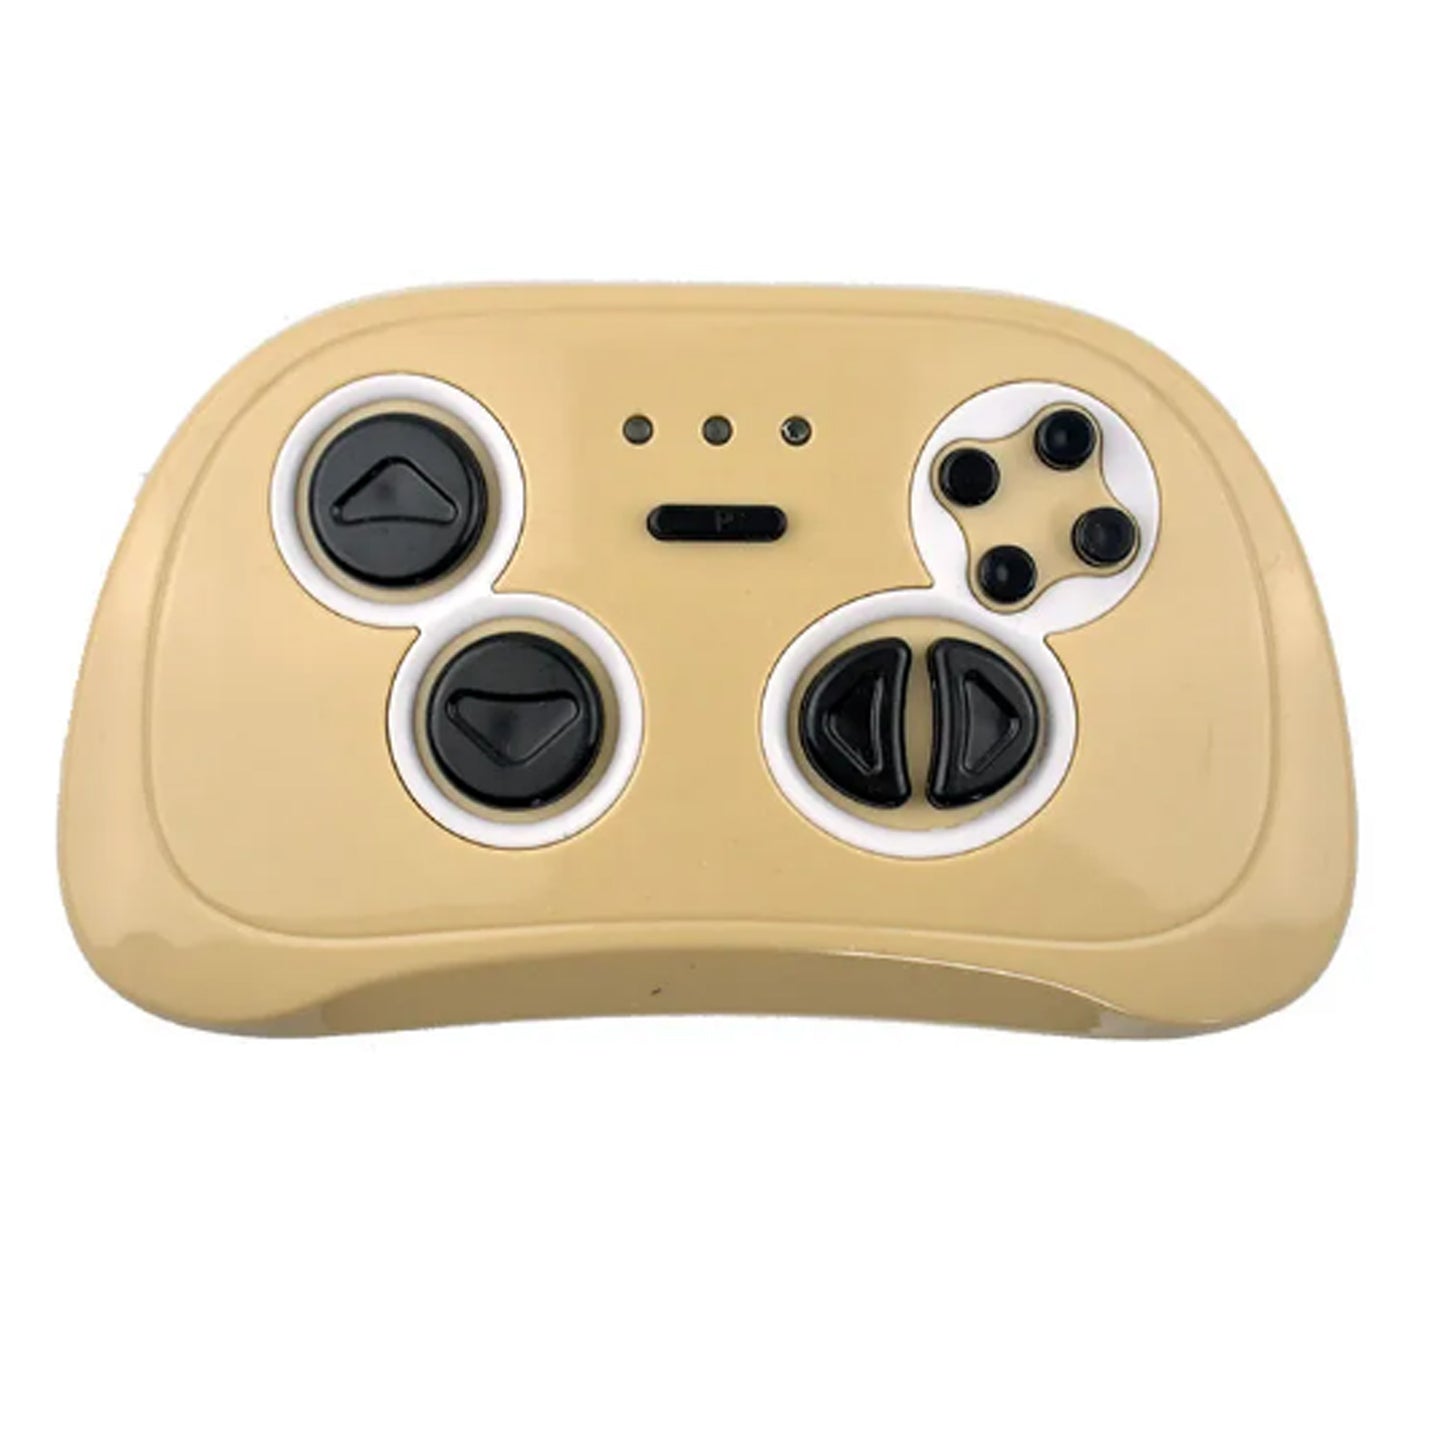 MM TOYS HH619Y Remote Control Only For Electric Ride-on Car Jeep -2.4 Ghz Mobile App Compatible, Speed Control, Yellow Color